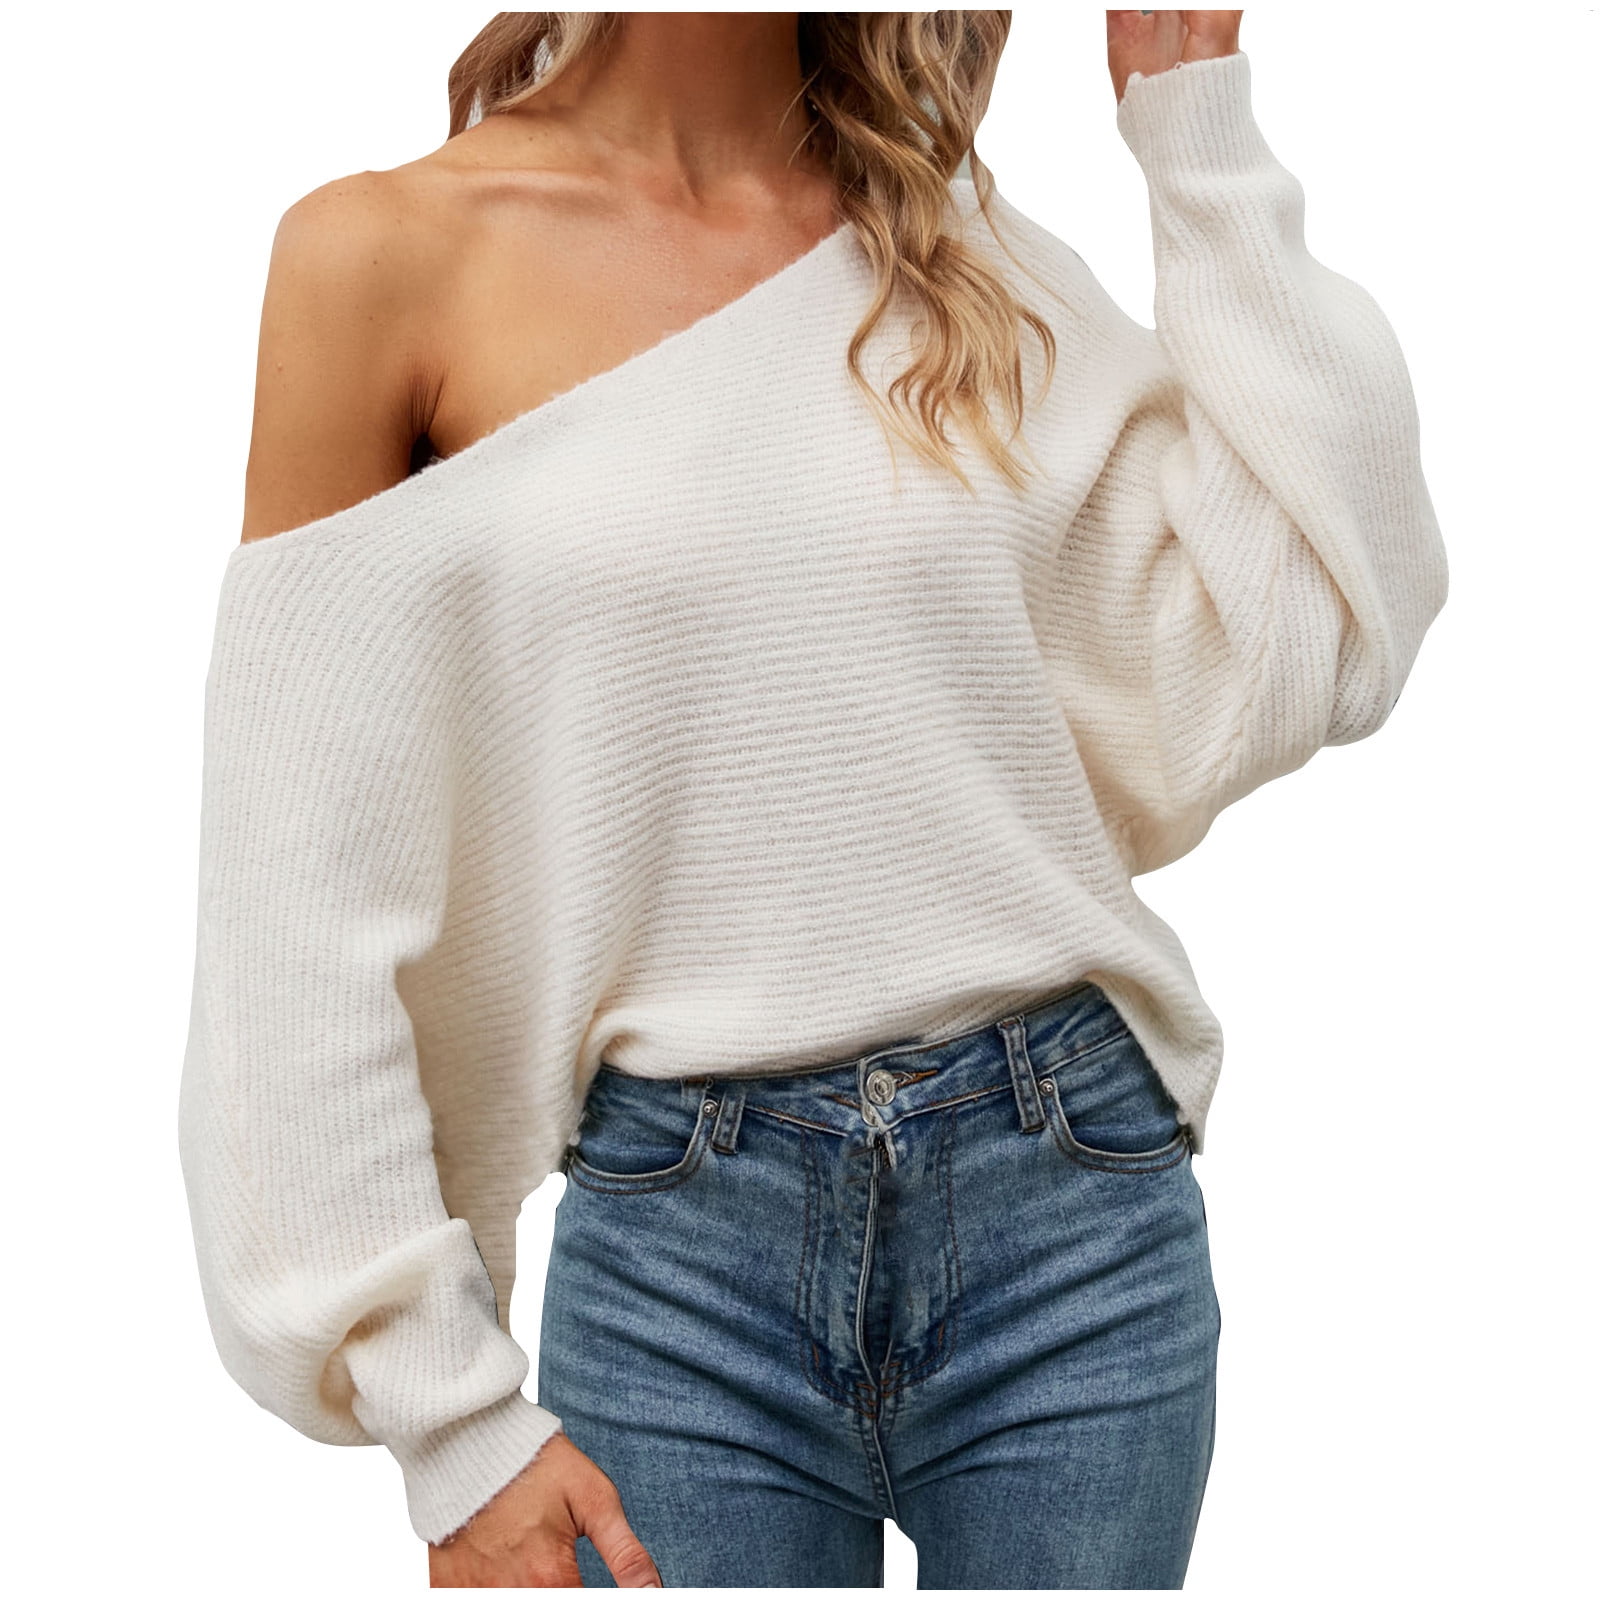 QUYUON Holiday Sweaters for Women One Shoulder Sweaters Women's